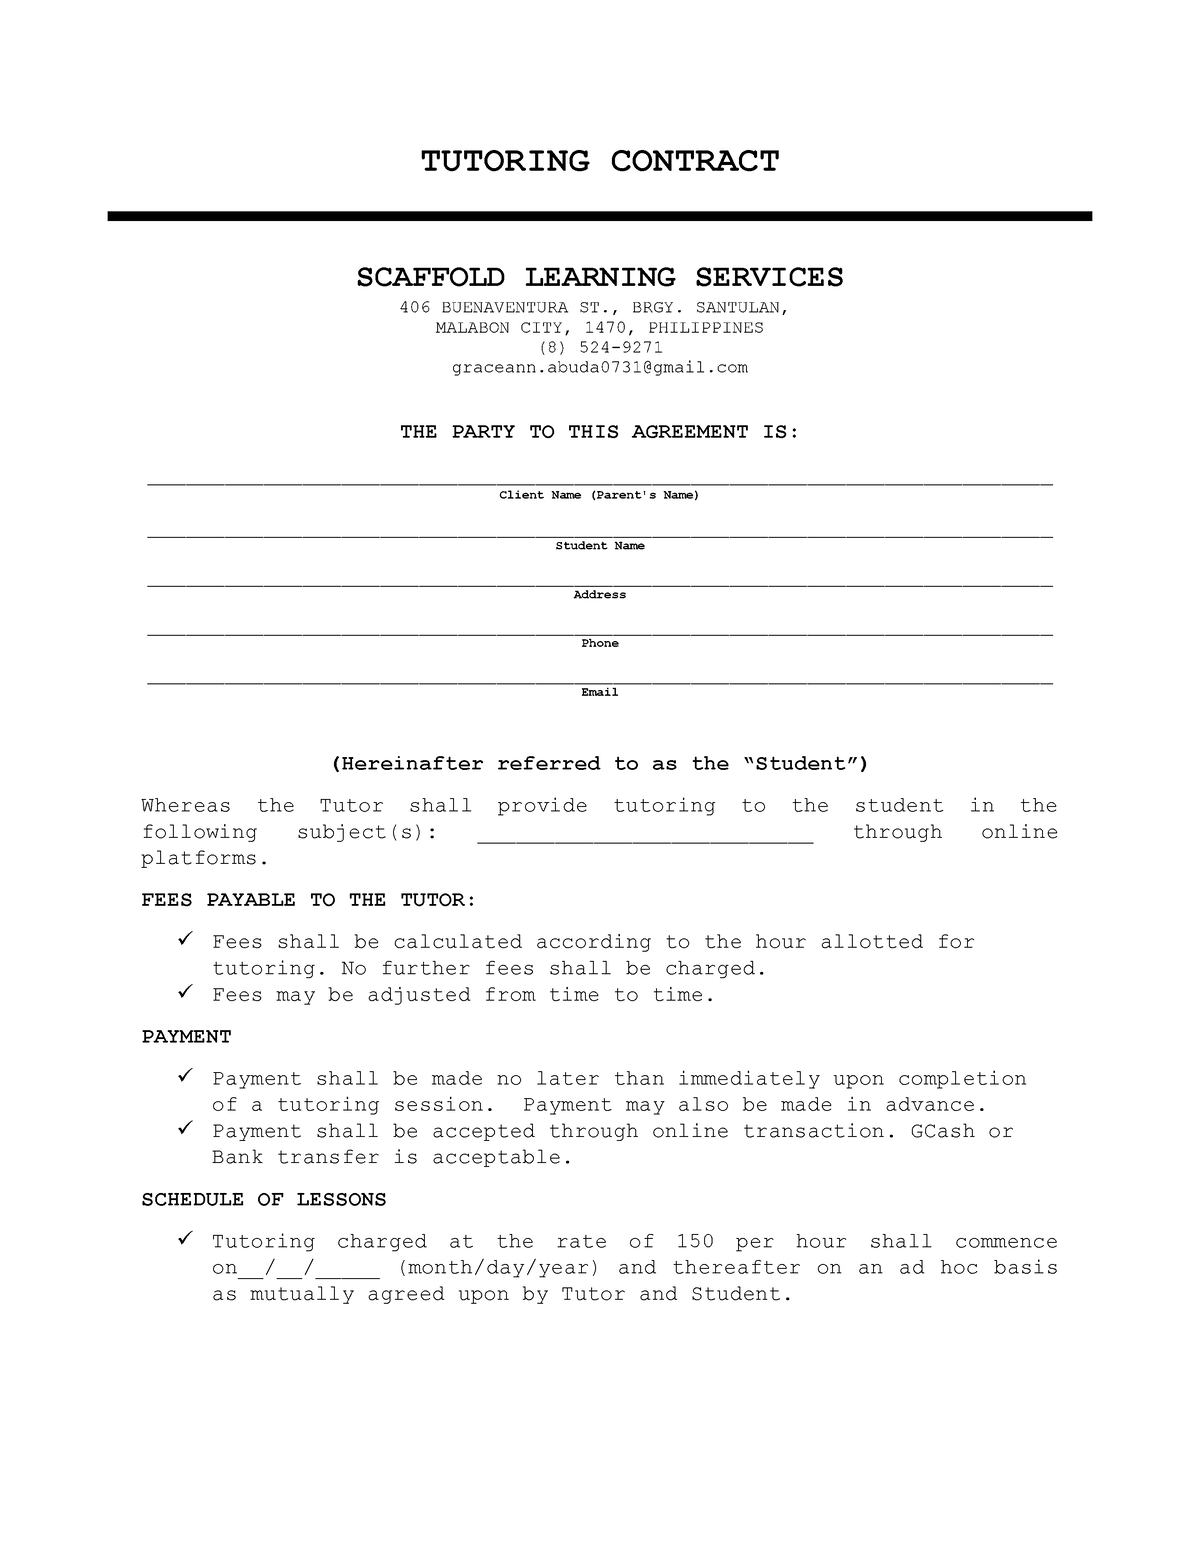 tutoring-contract-template-free